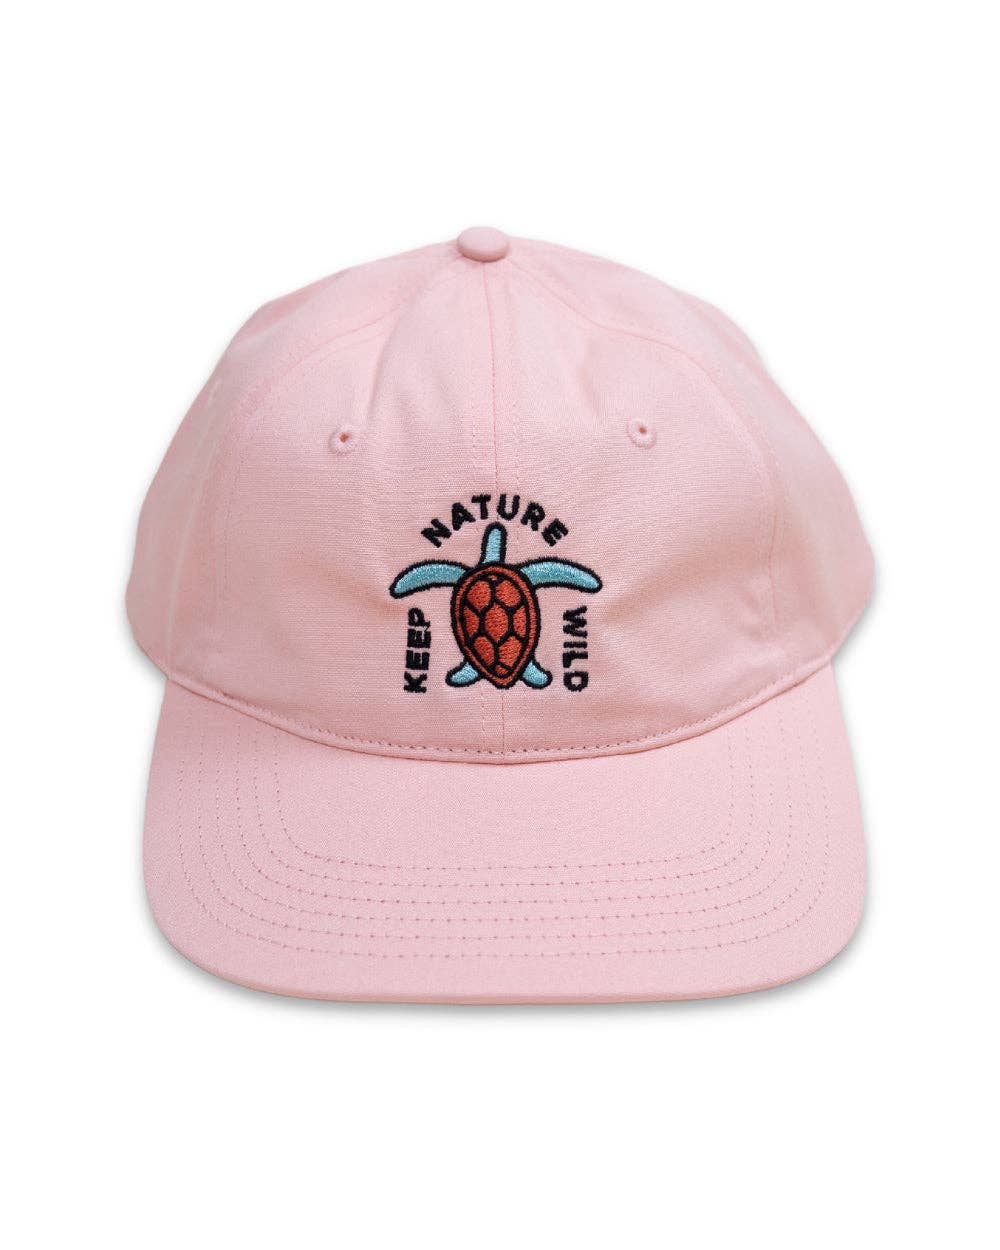 Pink Turtle dad hat by Keep Nature Wild